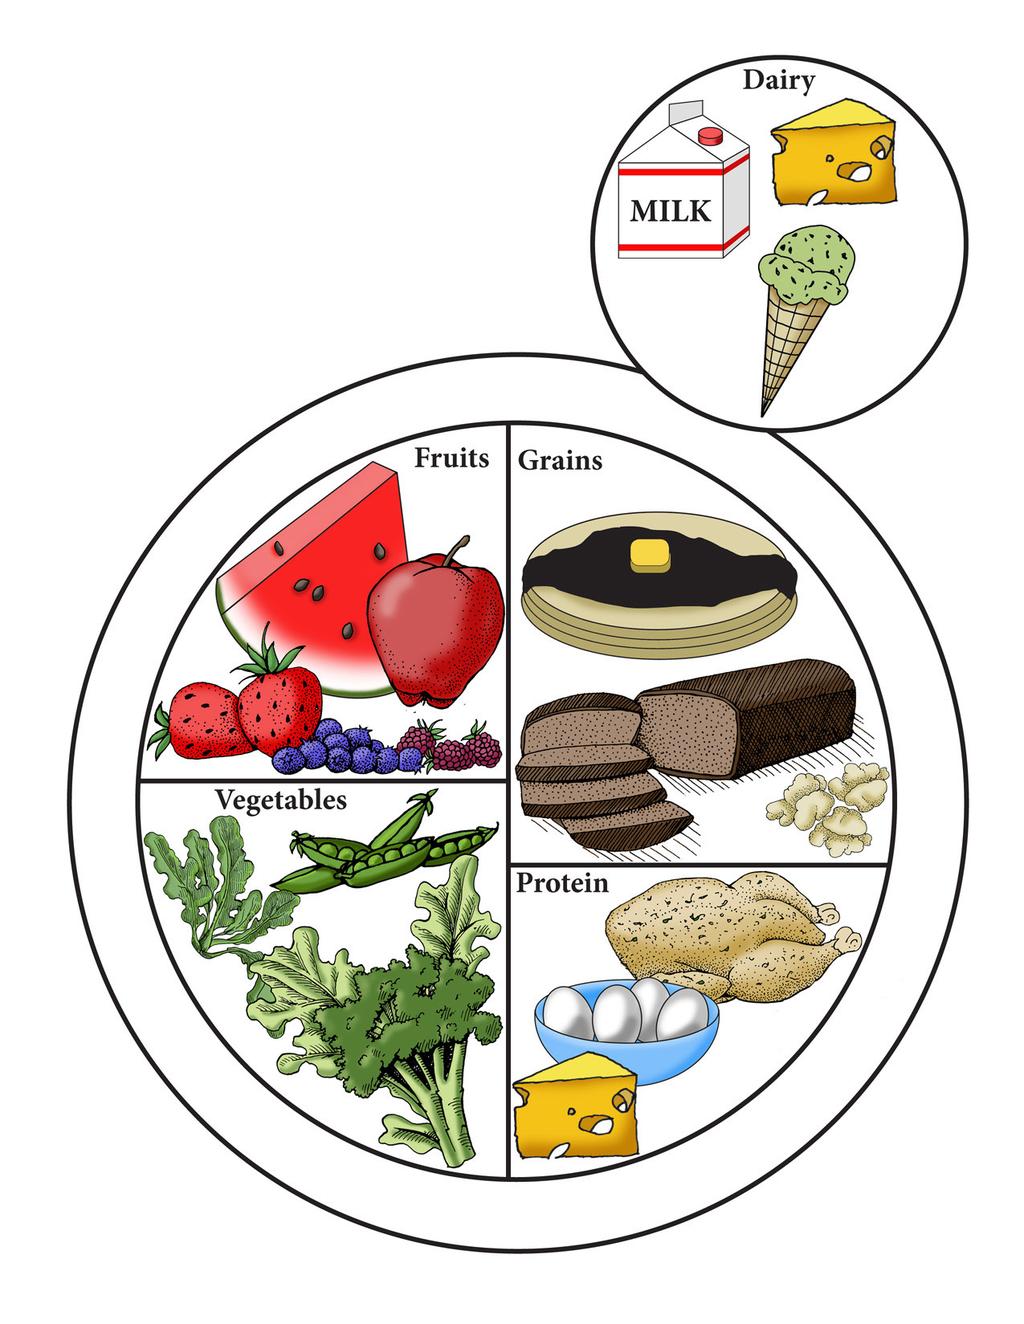 Nutrition - What Should We Eat?